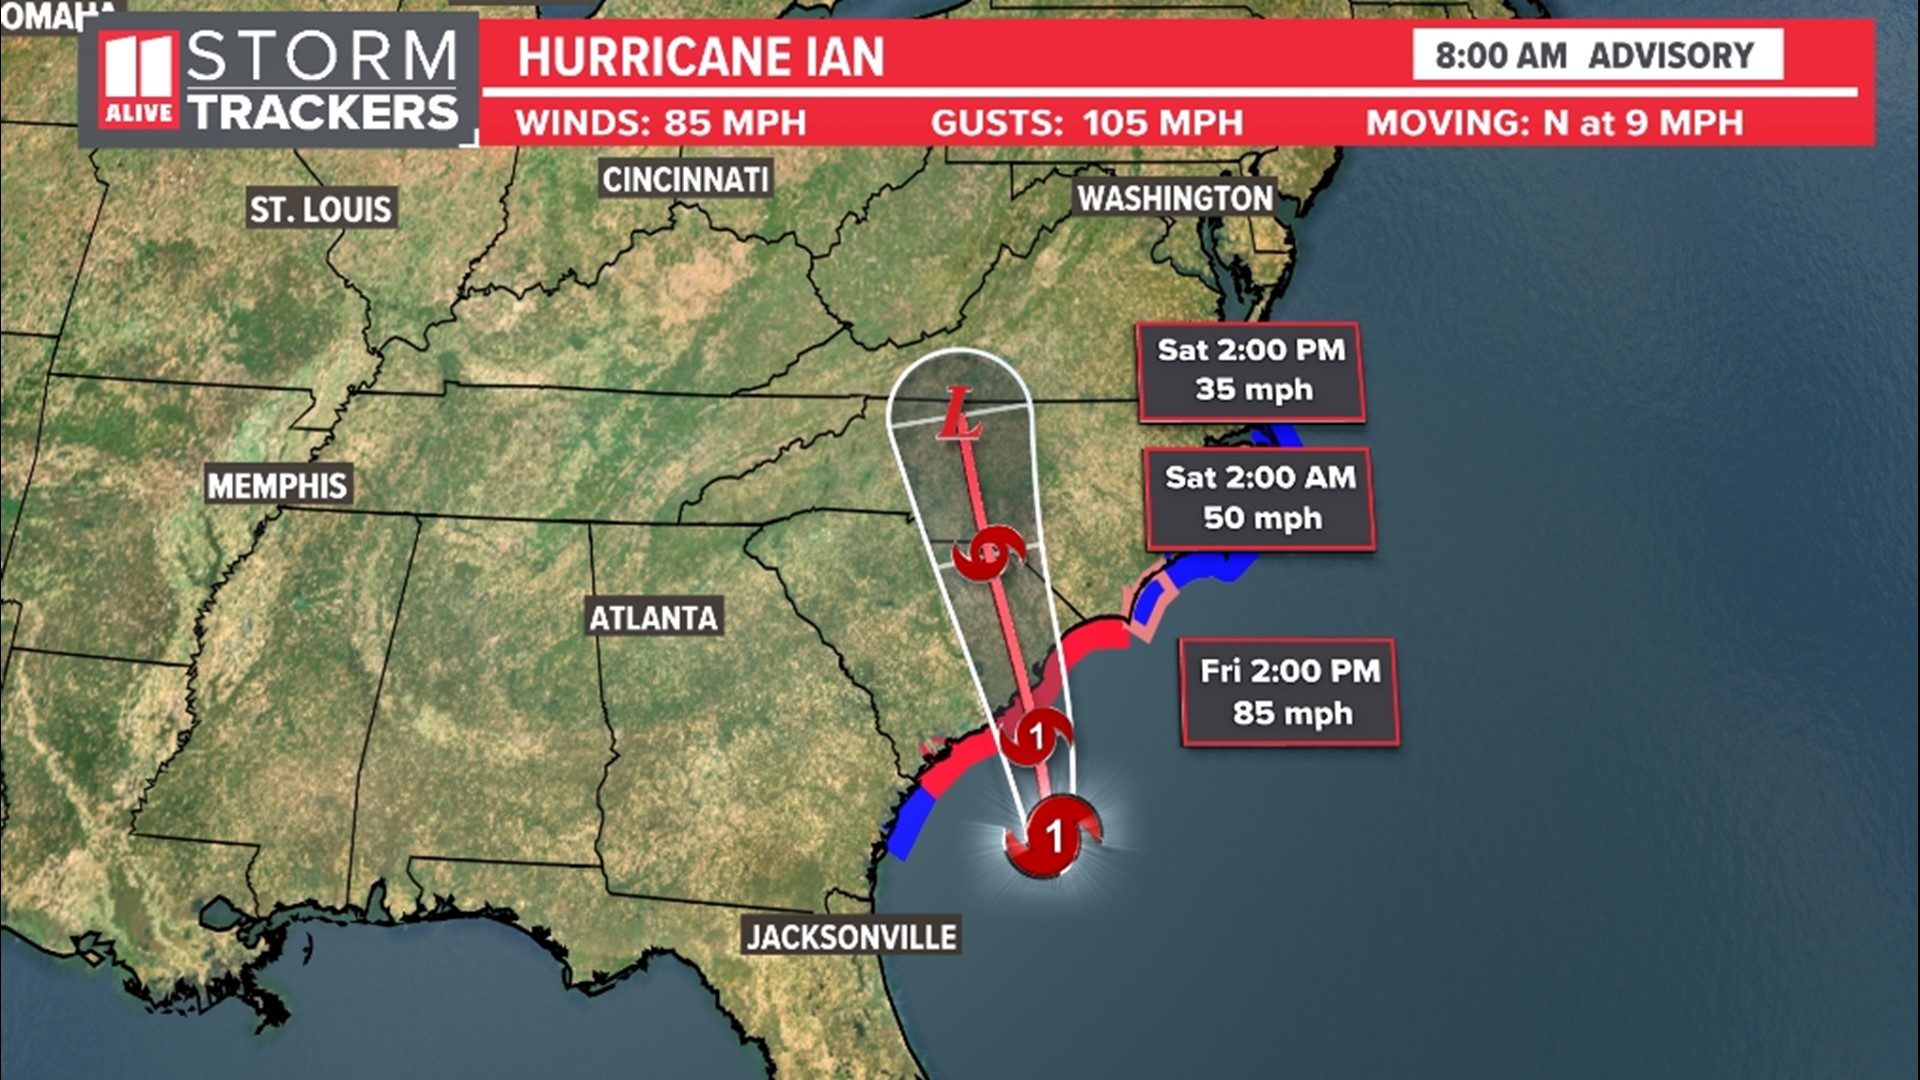 Hurricane Ian makes its way toward S.C. What impact could see